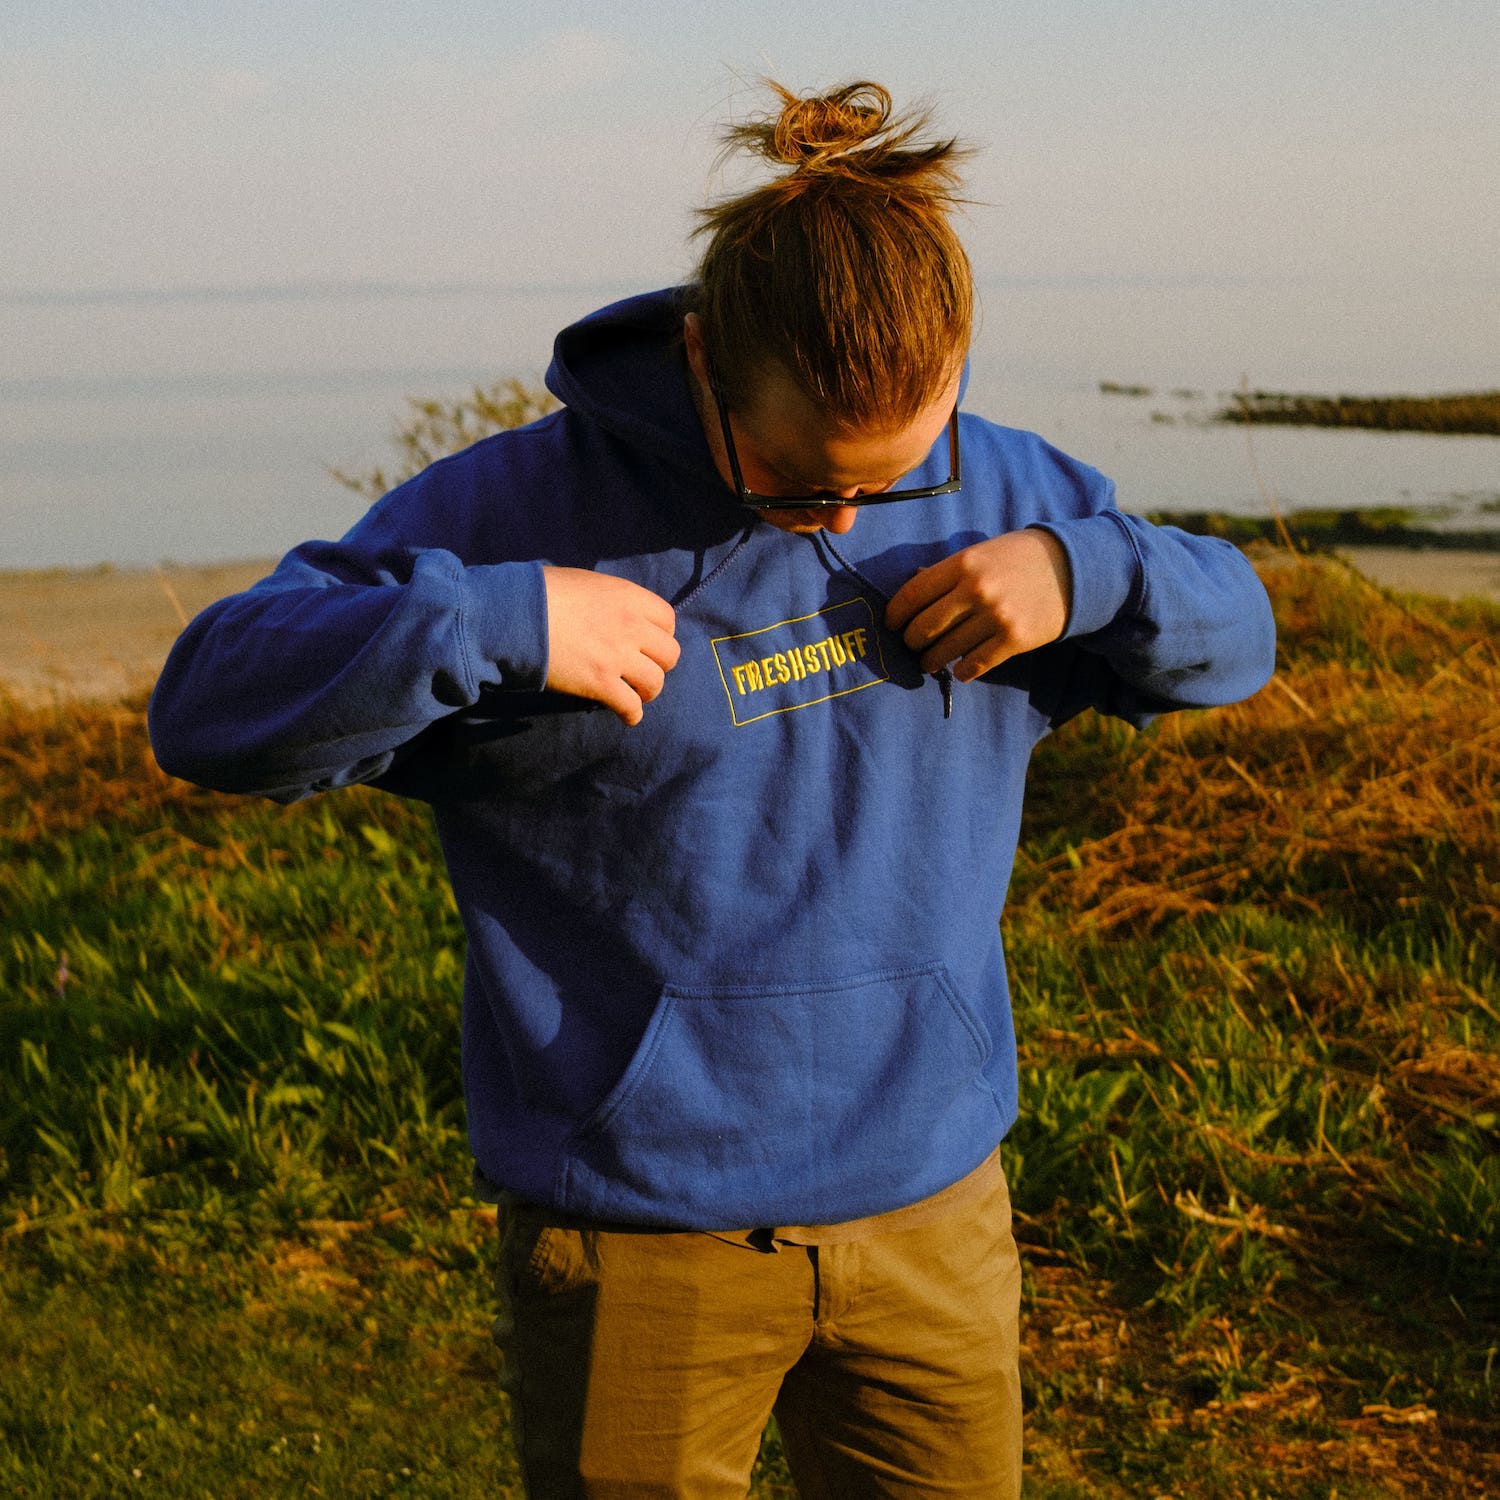 Fresh Home Video Unisex Embroidered Blue Hoodie